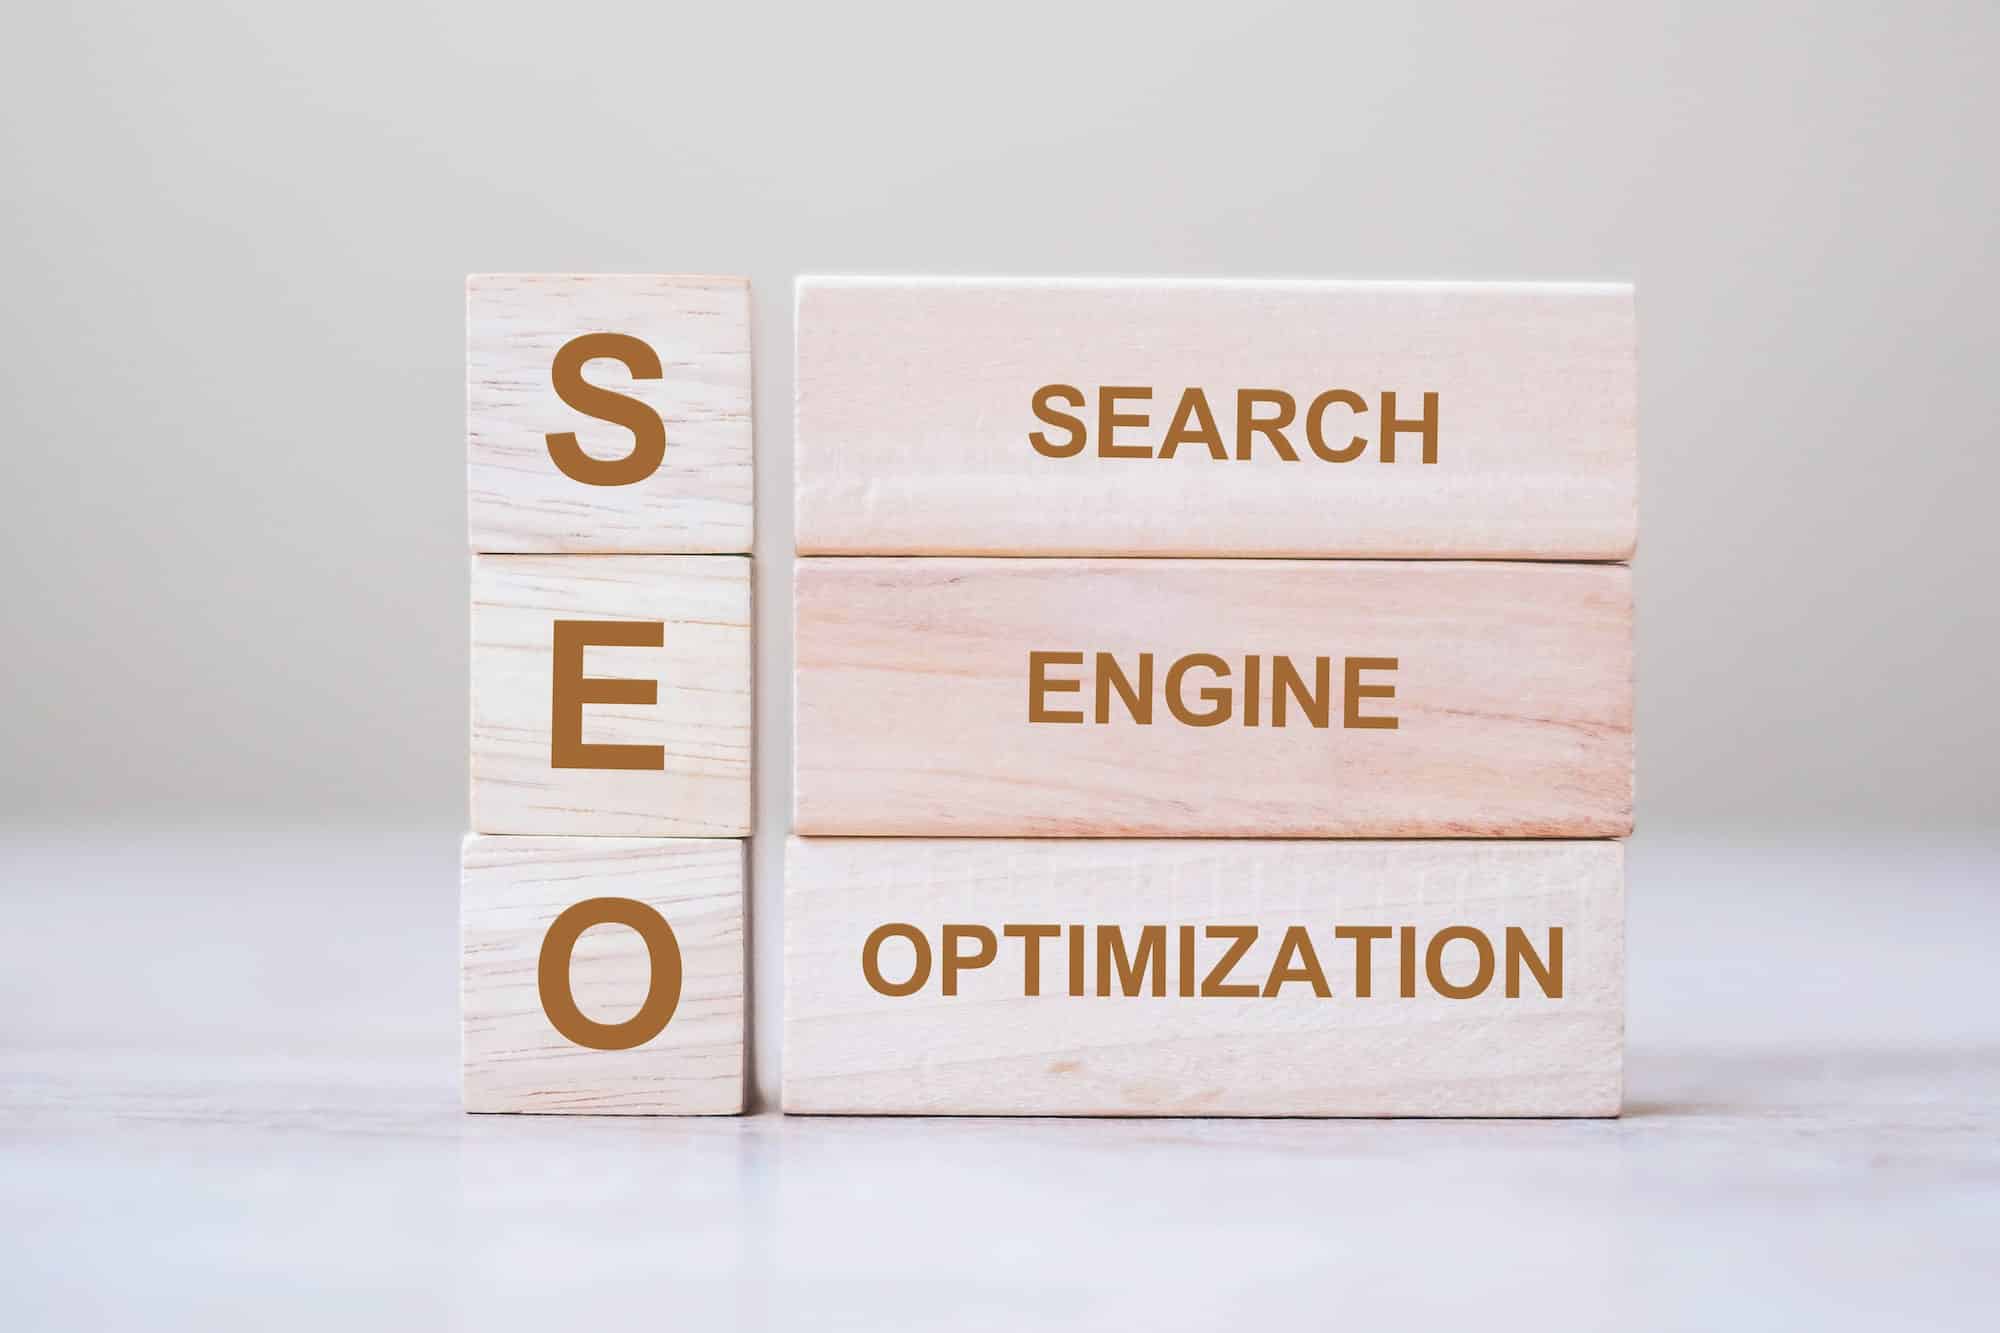 Content is key to effective SEO